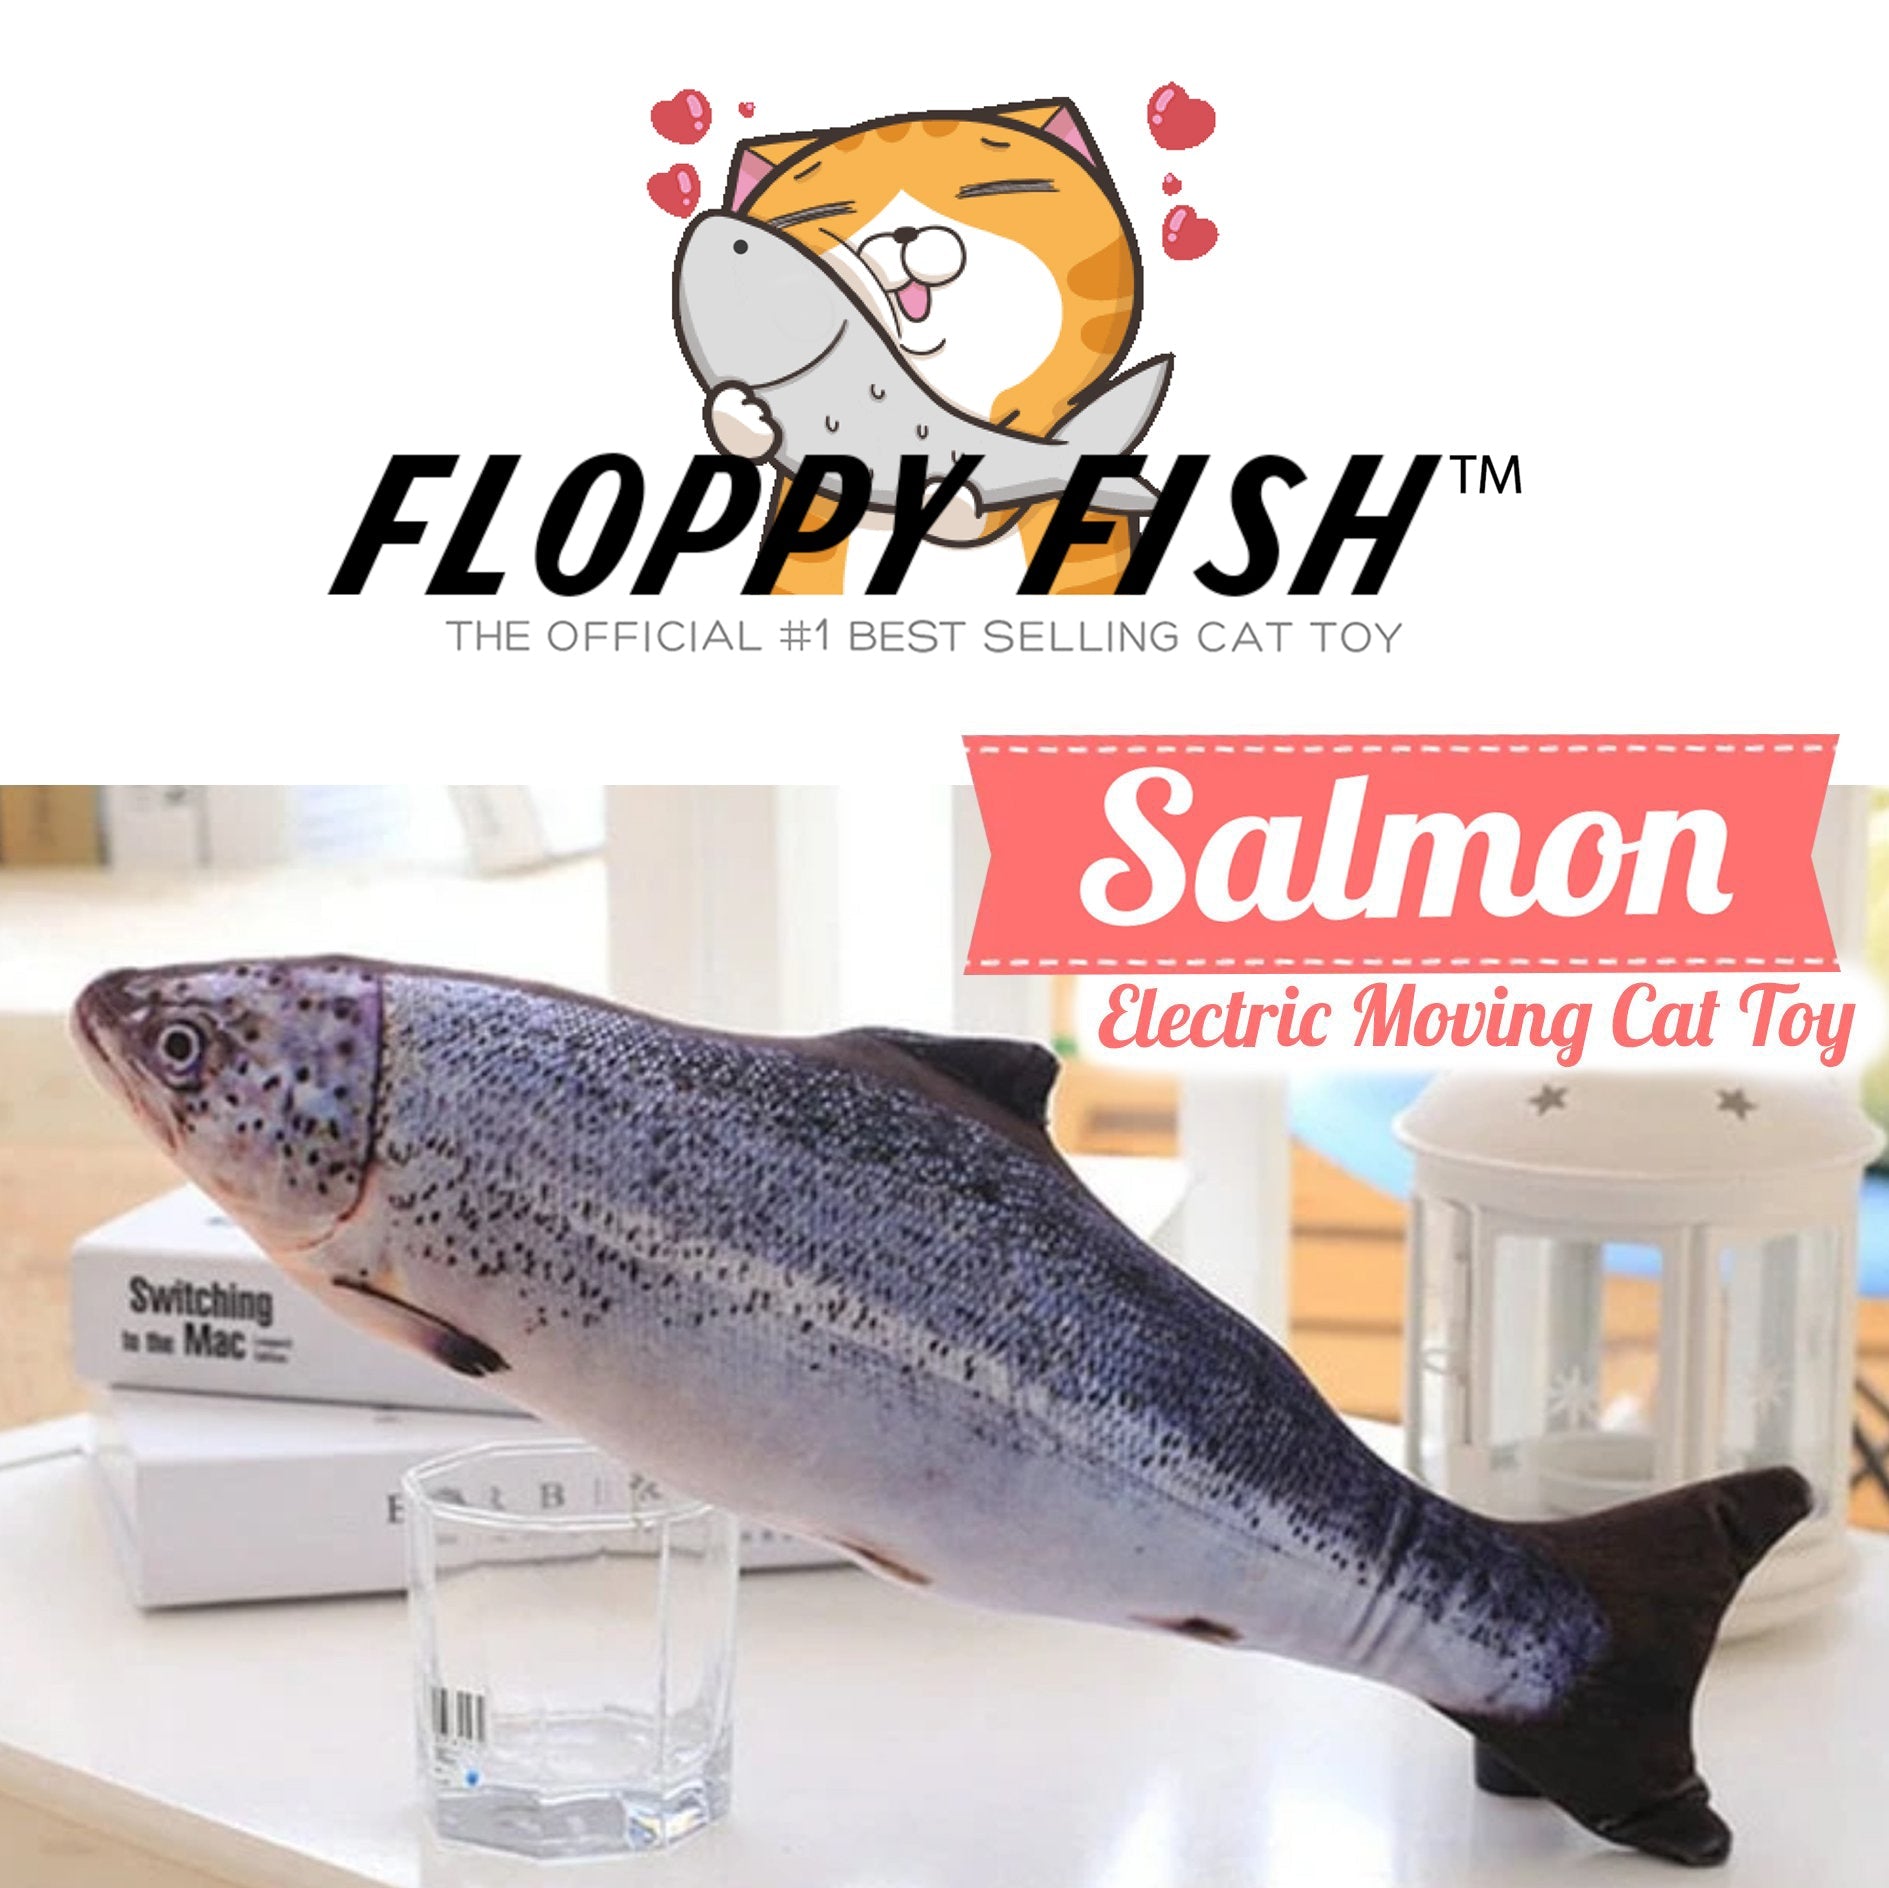 Floppy Fish Interactive Toy For Cats That Moves On Its Own, Salmon Texture With Catnip